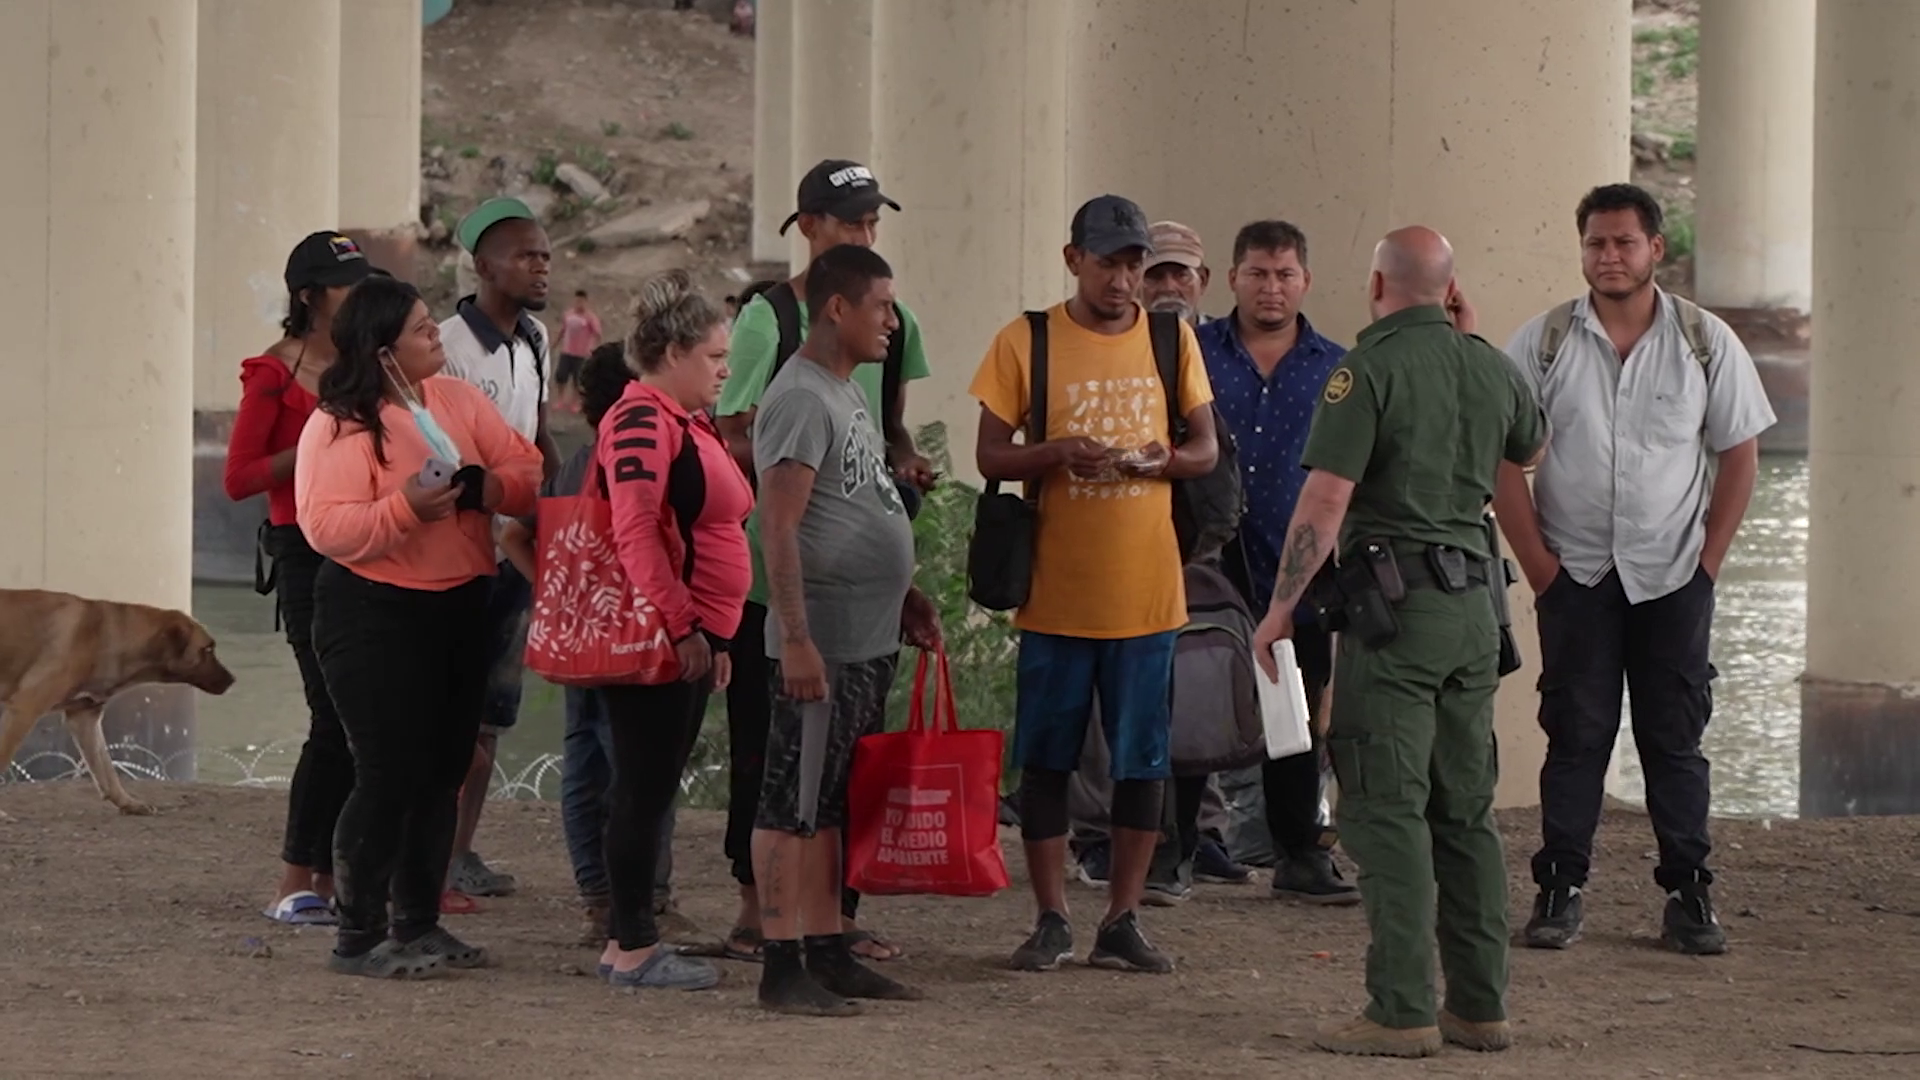 Ministries and faith communities are joining forces to serve and assist the migrants who are at the northern border of Mexico.